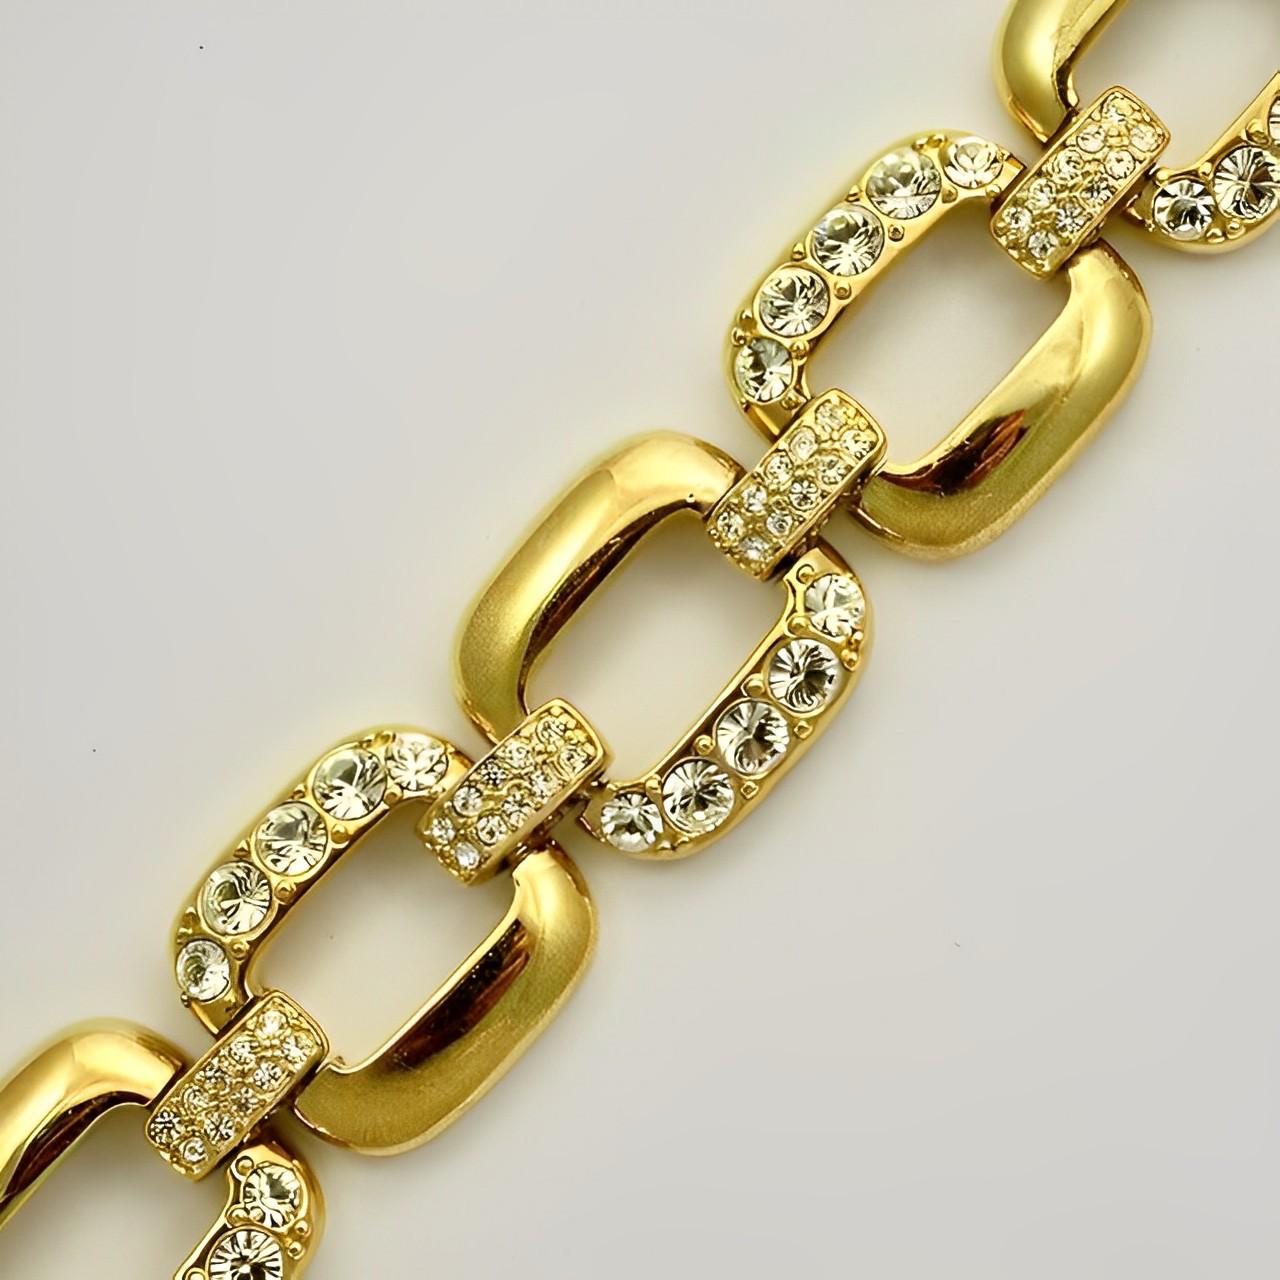 Glamorous gold plated wide link bracelet set with crystals. Measuring length 19.6 cm / 7.7 inches by width 2.4 cm / .9 inch. The bracelet has some scratching as expected.

This lovely statement bracelet is circa 1980s.